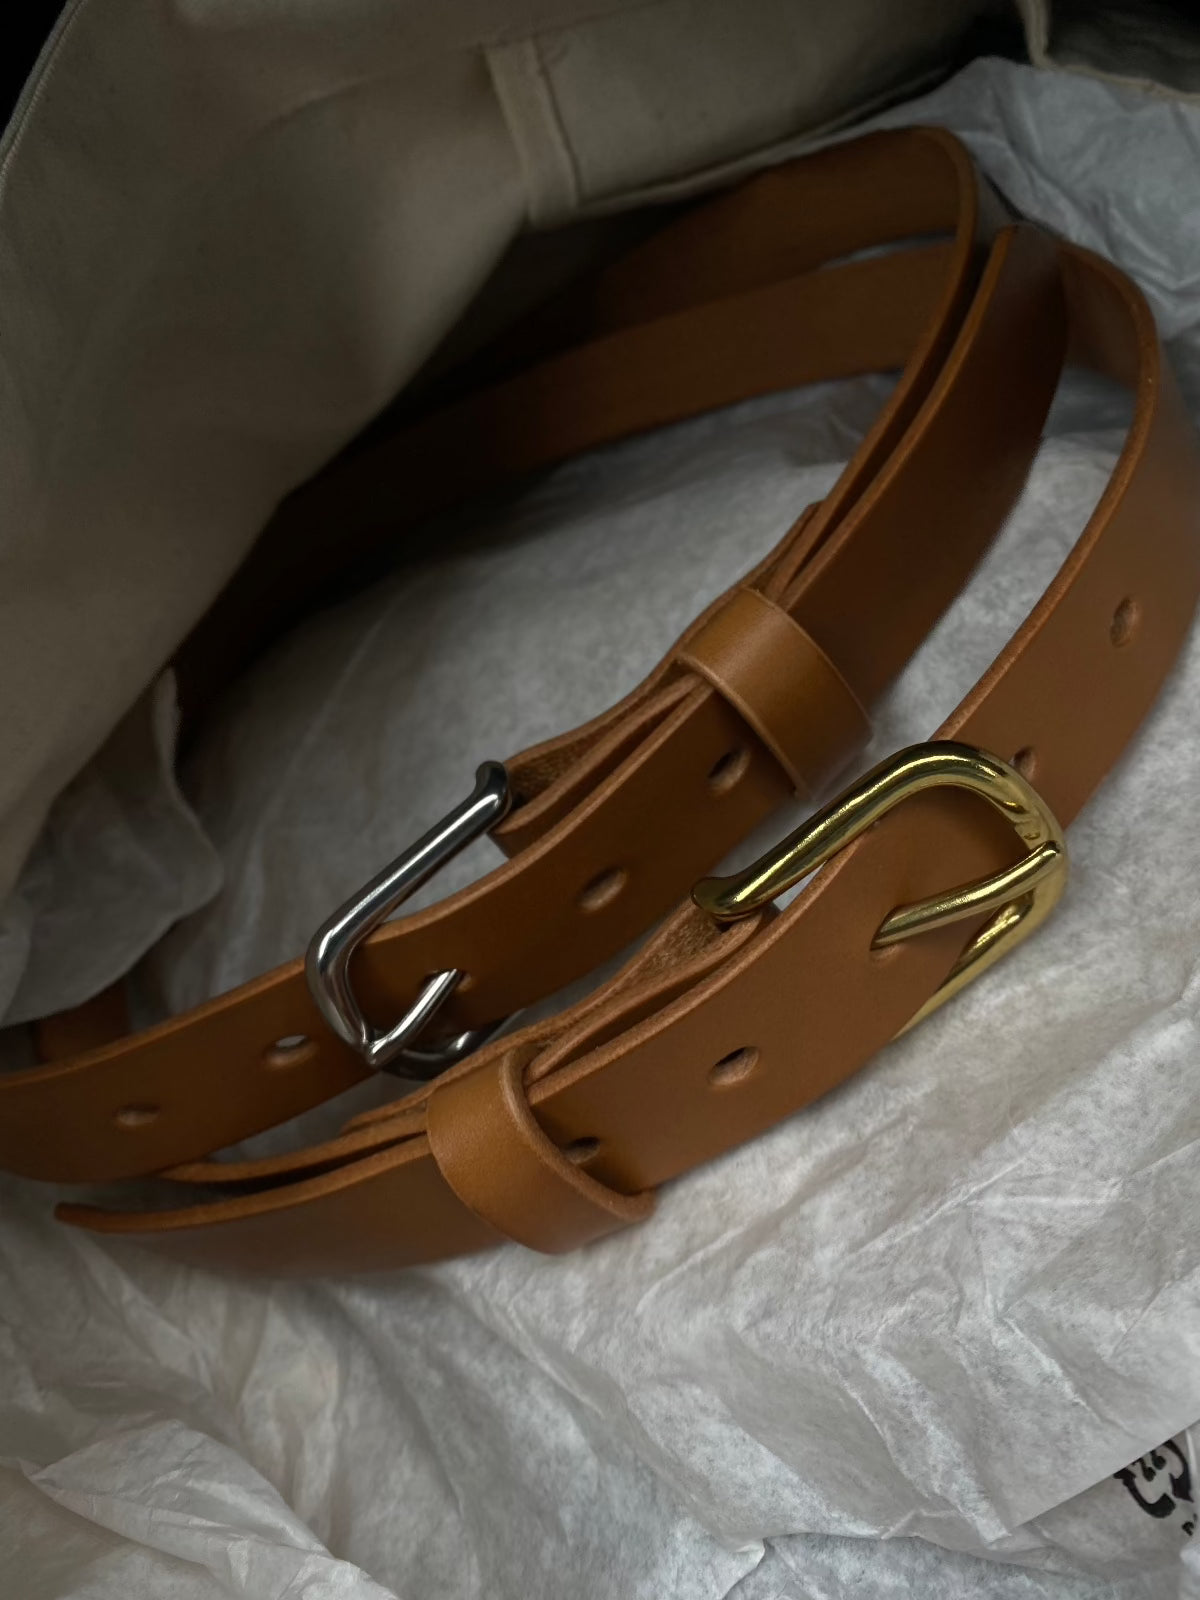 SAINT classic leather belt in tan leather with solid brass buckle. made in Australia using traditional leather smith techniques. 100% Italian leather